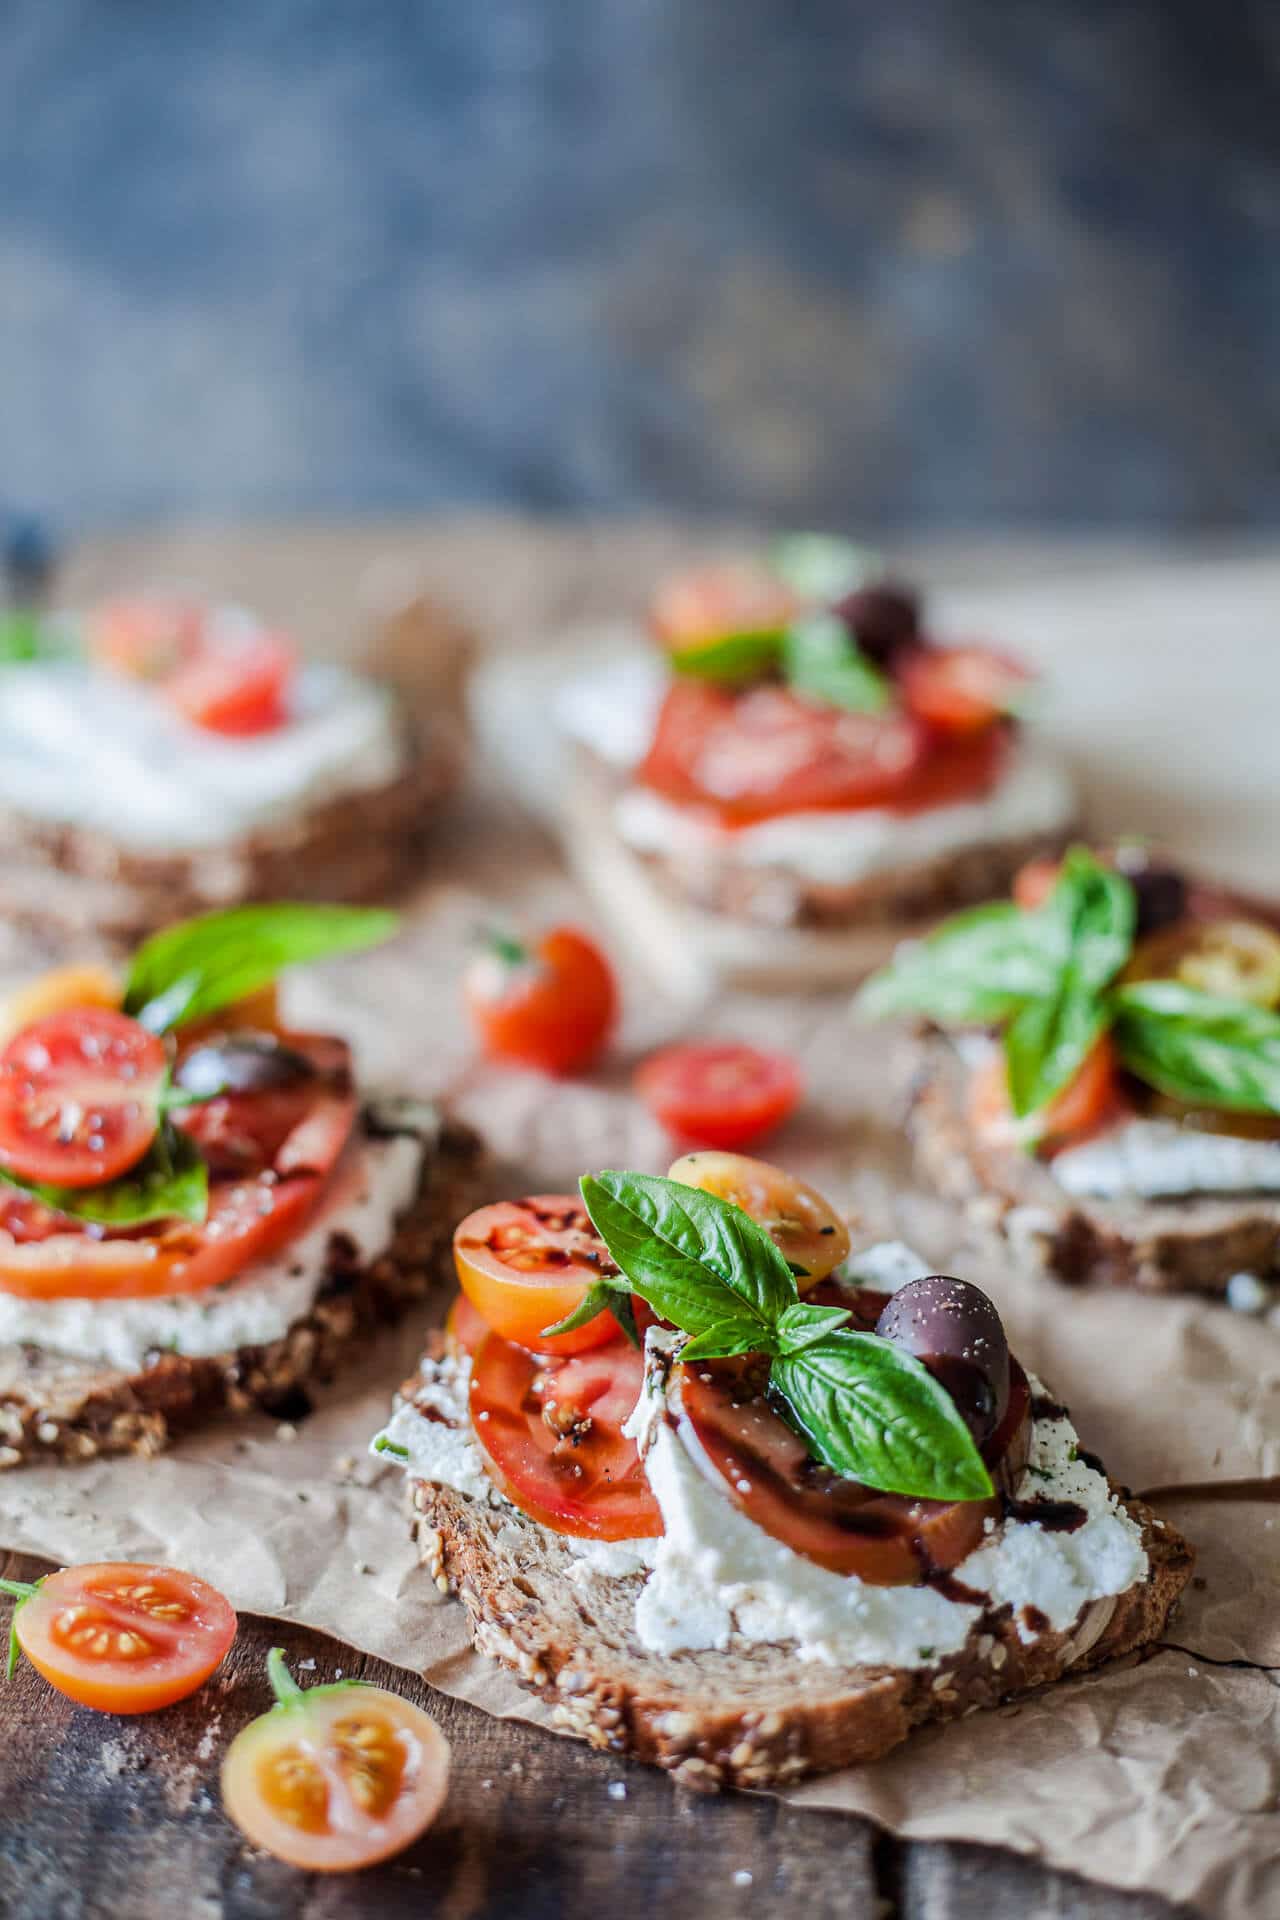 Tomato Wholewheat Sandwiches with Goat's Milk Ricotta are the perfect savory breakfast or a quick snack. Vegetarian and delicious! | Vibrant Plate